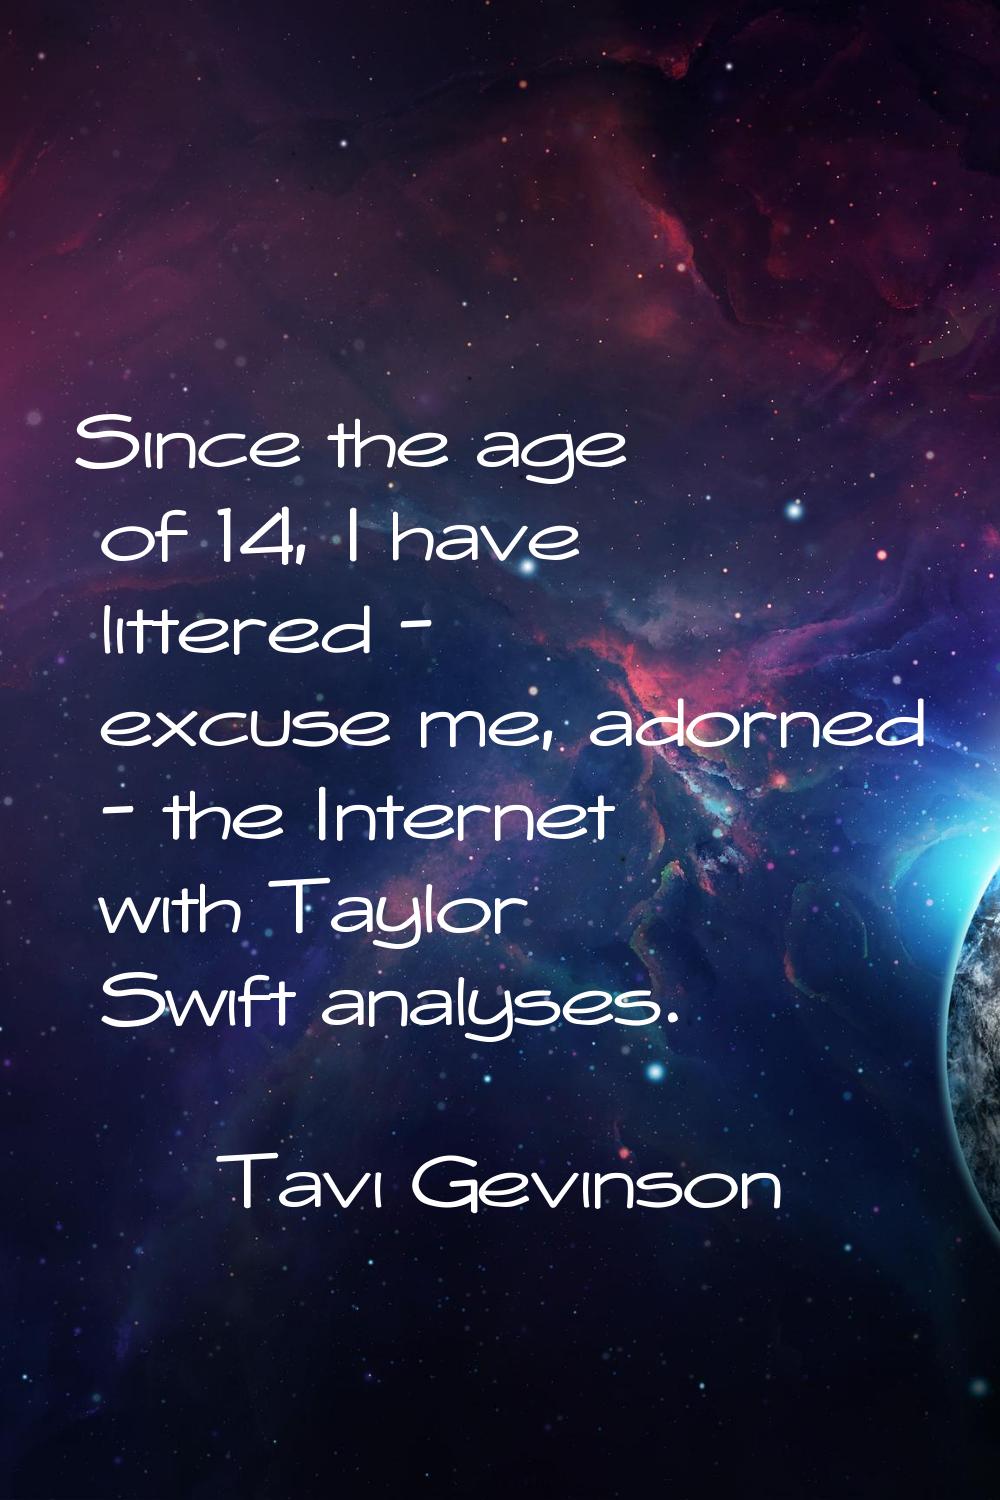 Since the age of 14, I have littered - excuse me, adorned - the Internet with Taylor Swift analyses